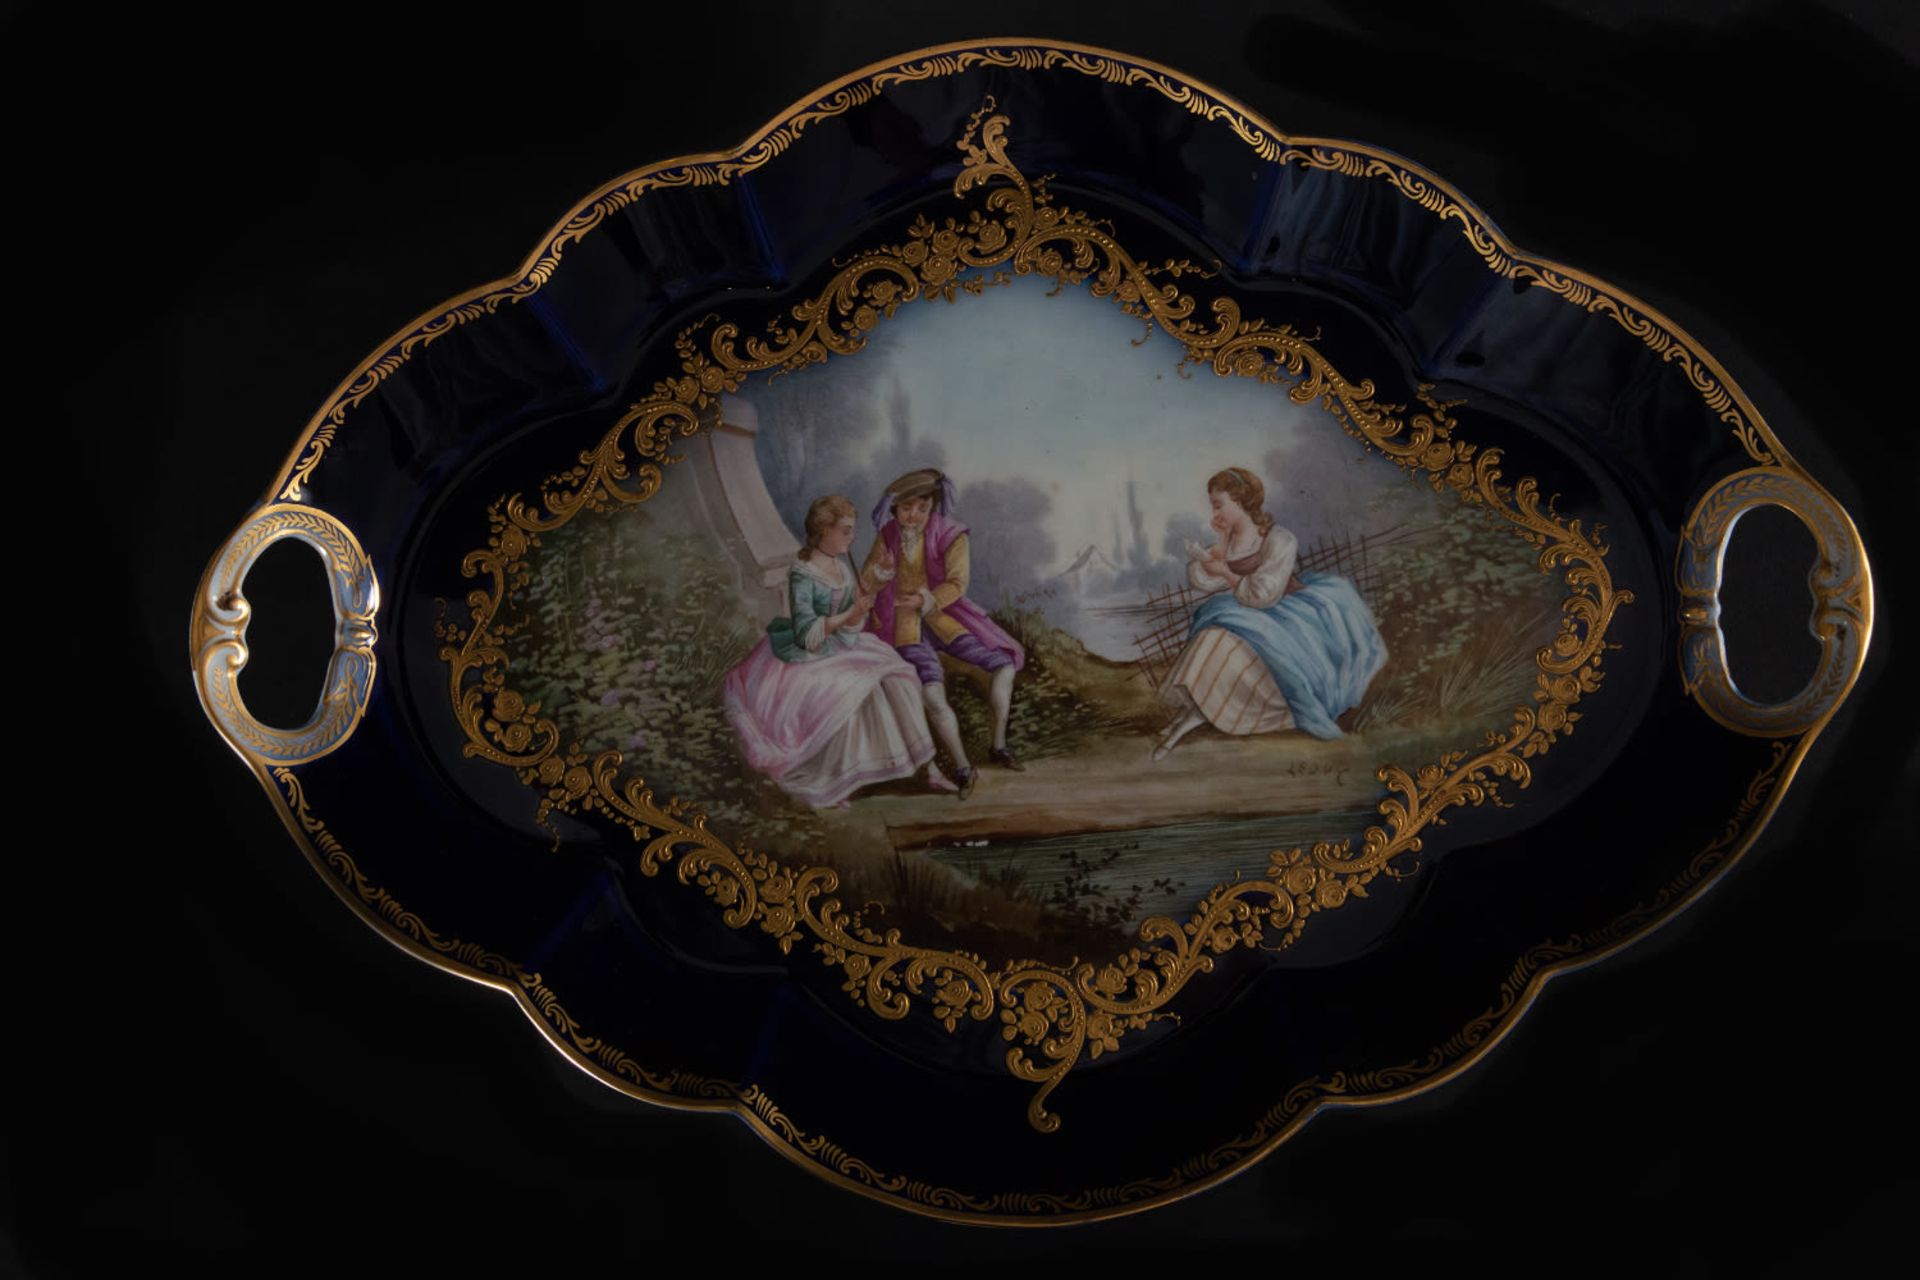 Hand-painted and enameled Sèvres porcelain tray, 19th century